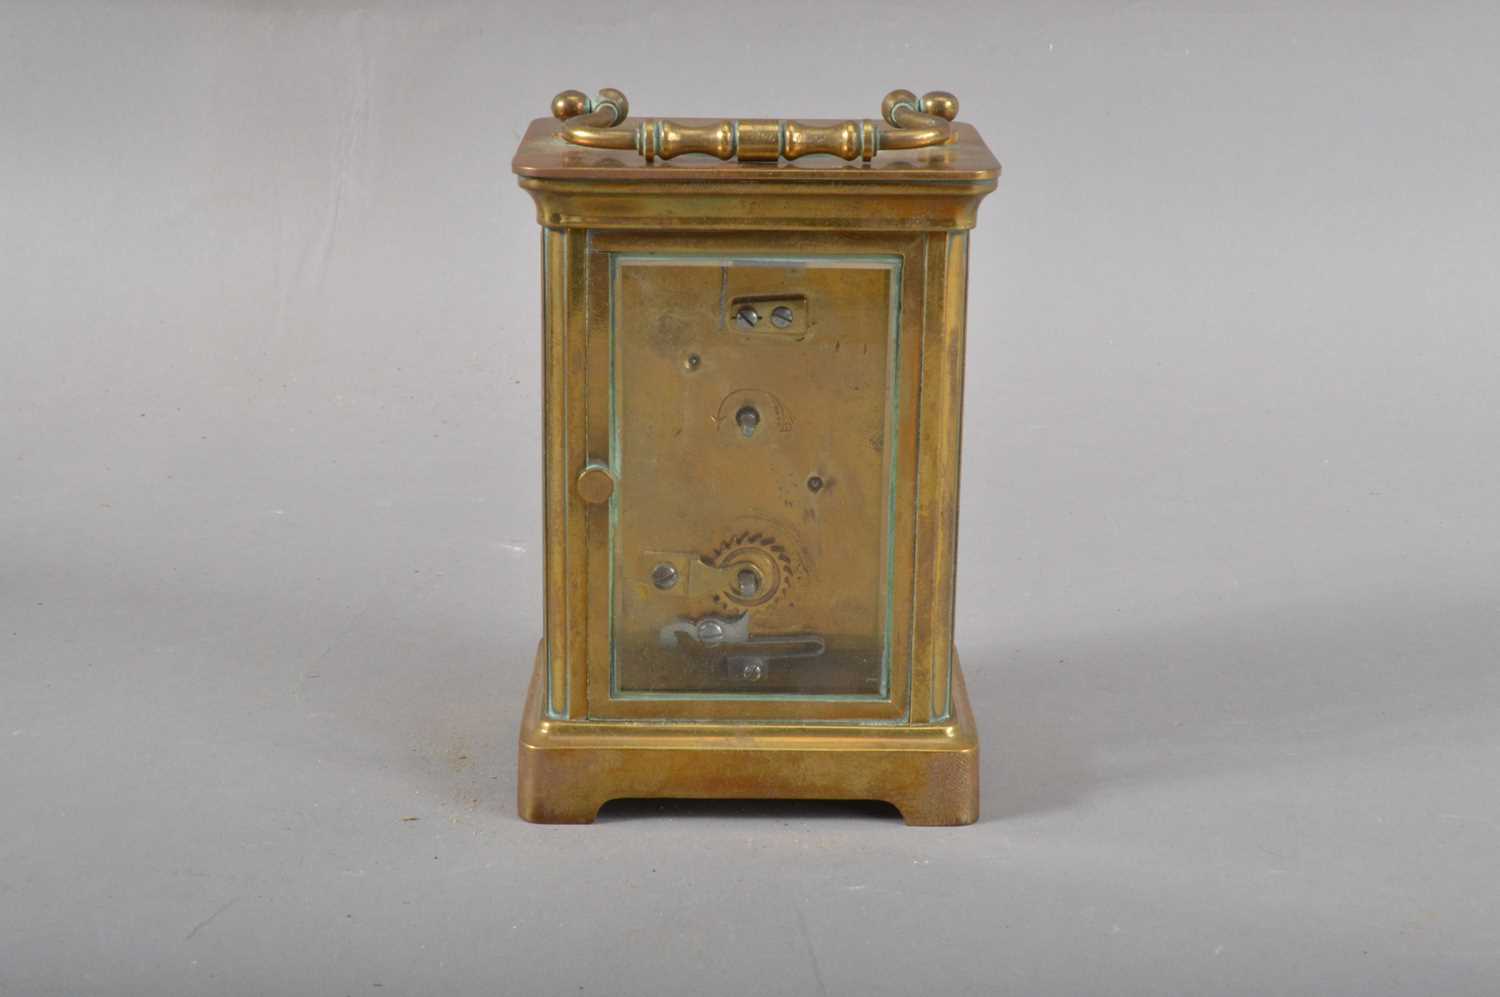 A first half of the 20th century brass carriage clock, - Image 3 of 4